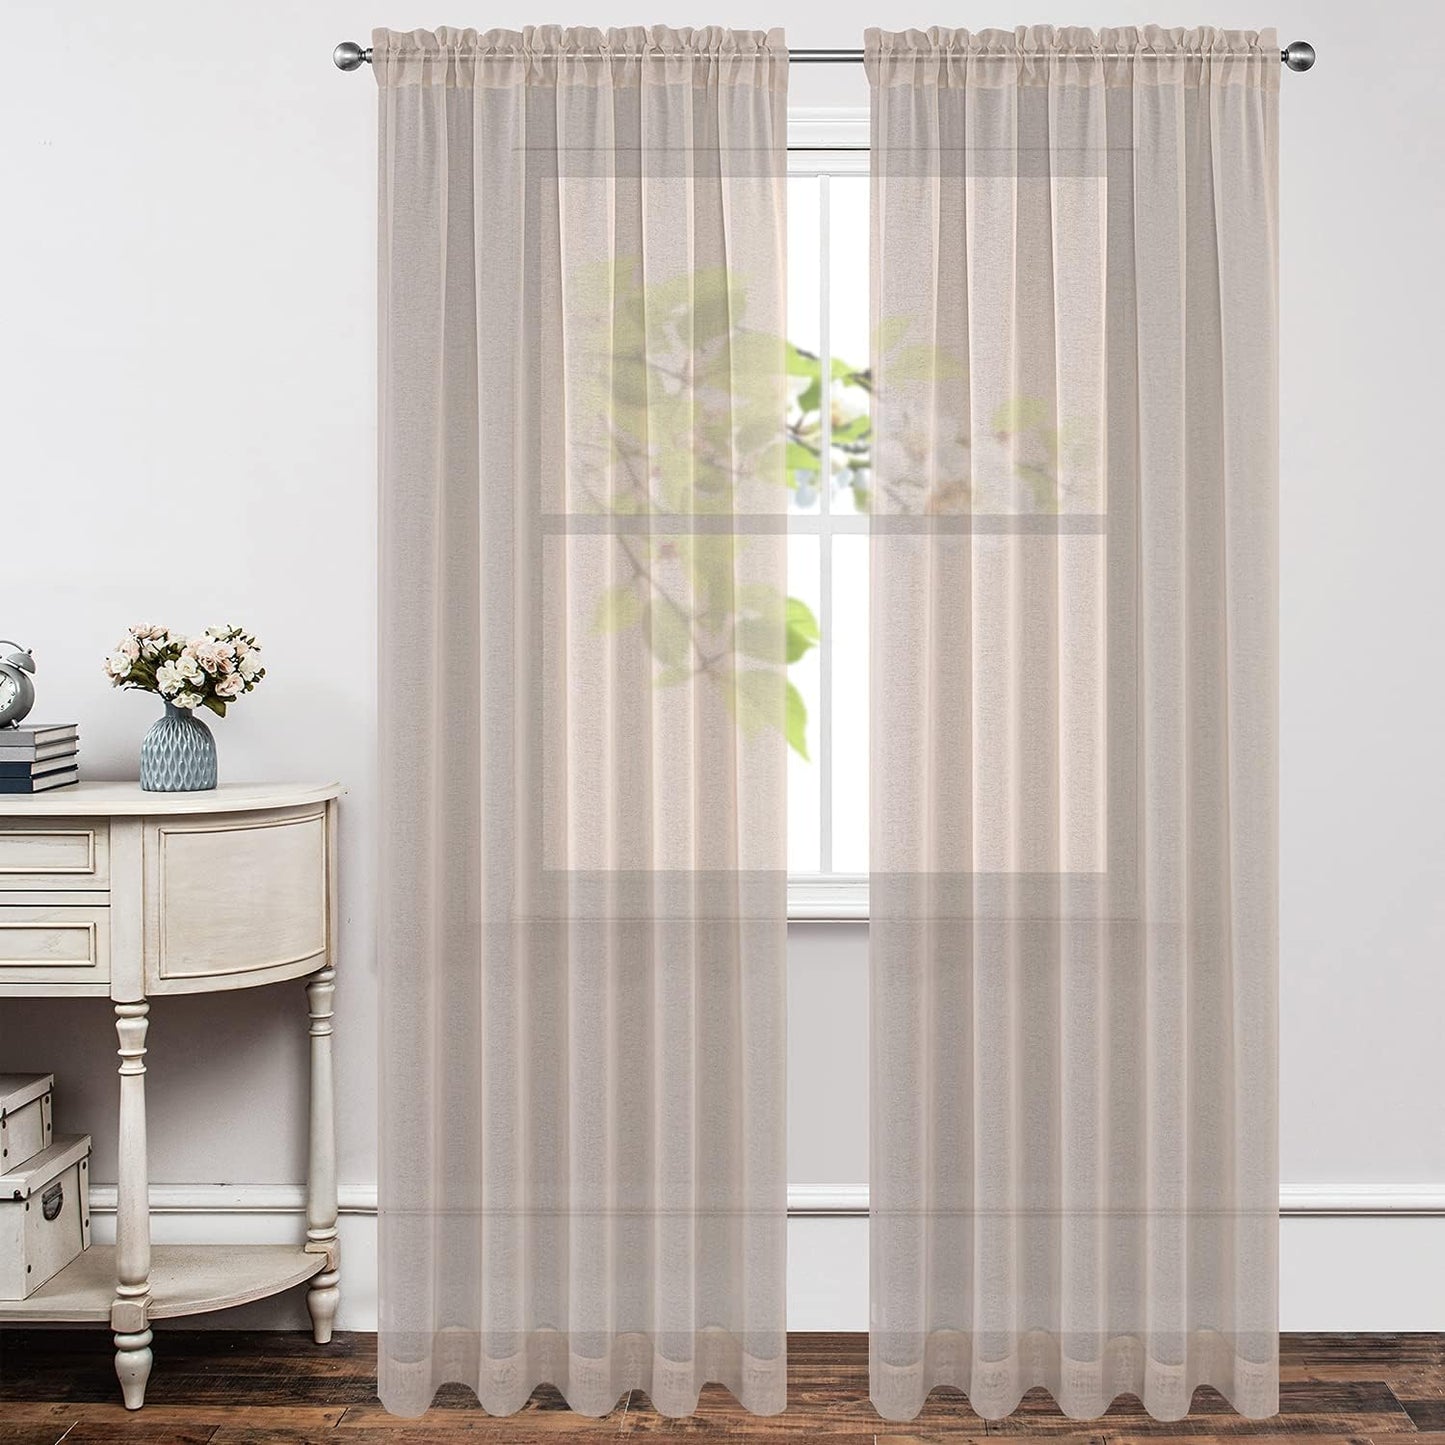 Joydeco White Sheer Curtains 63 Inch Length 2 Panels Set, Rod Pocket Long Sheer Curtains for Window Bedroom Living Room, Lightweight Semi Drape Panels for Yard Patio (54X63 Inch, off White)  Joydeco Linen 54W X 96L Inch X 2 Panels 